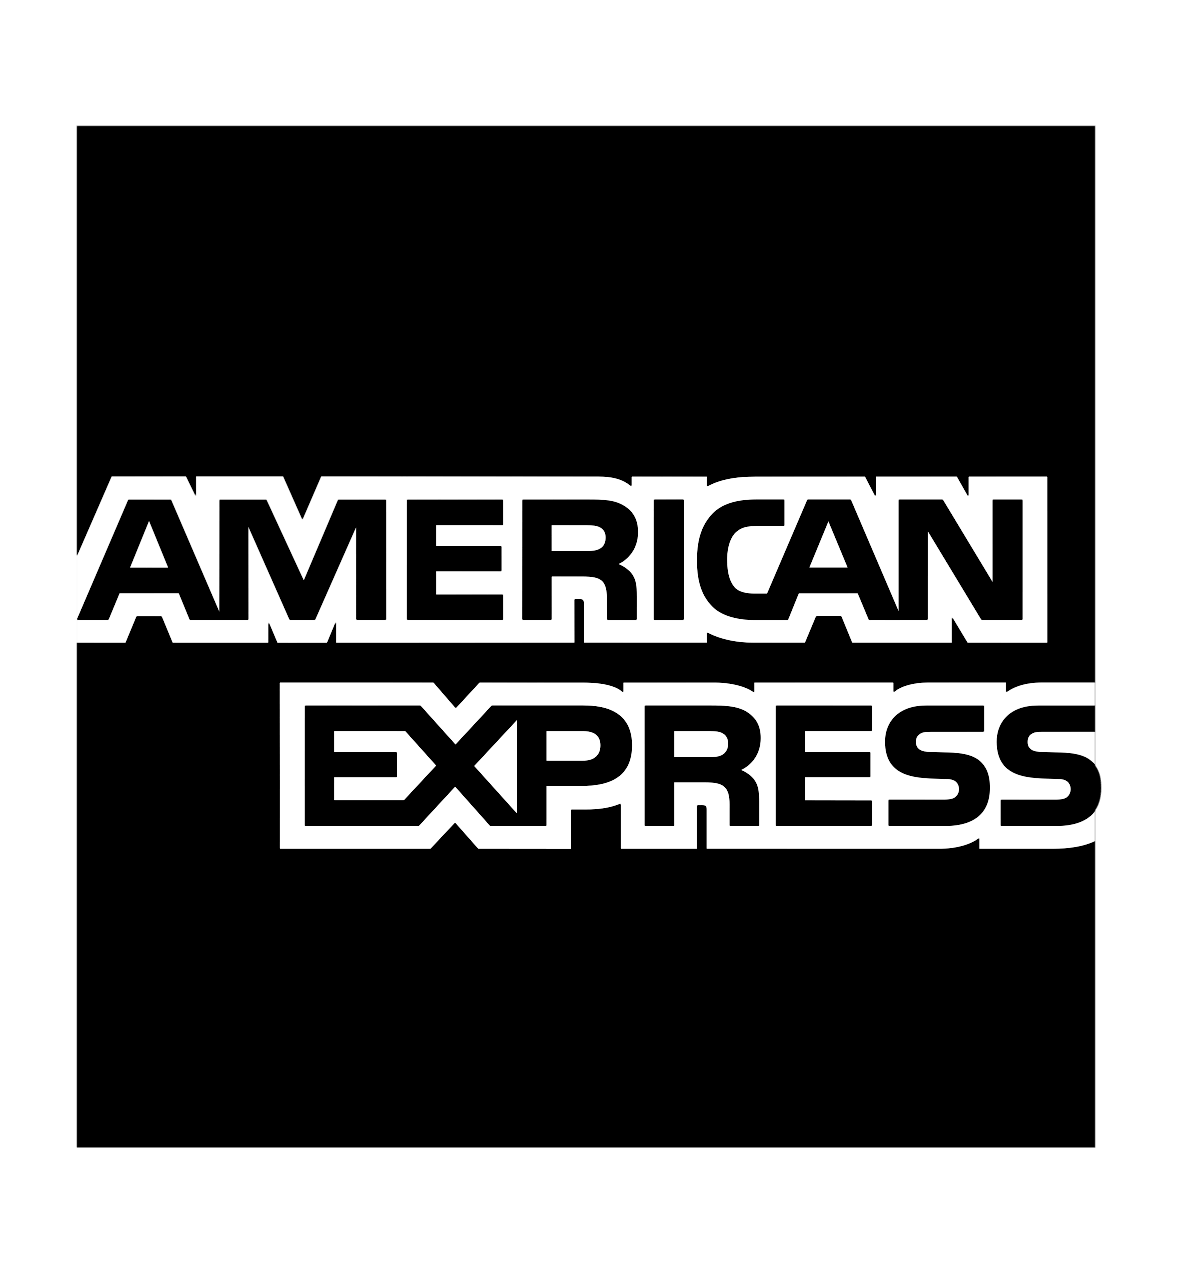 american-express-logo-black-and-white-1